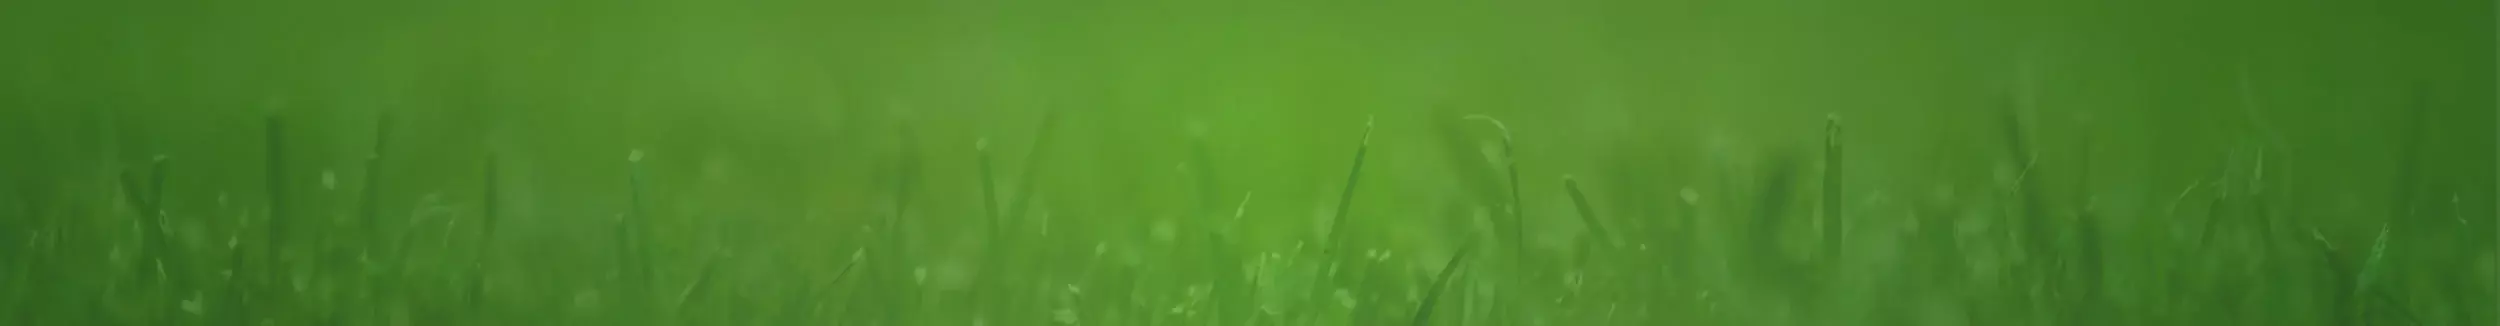 Blades of grass with green background